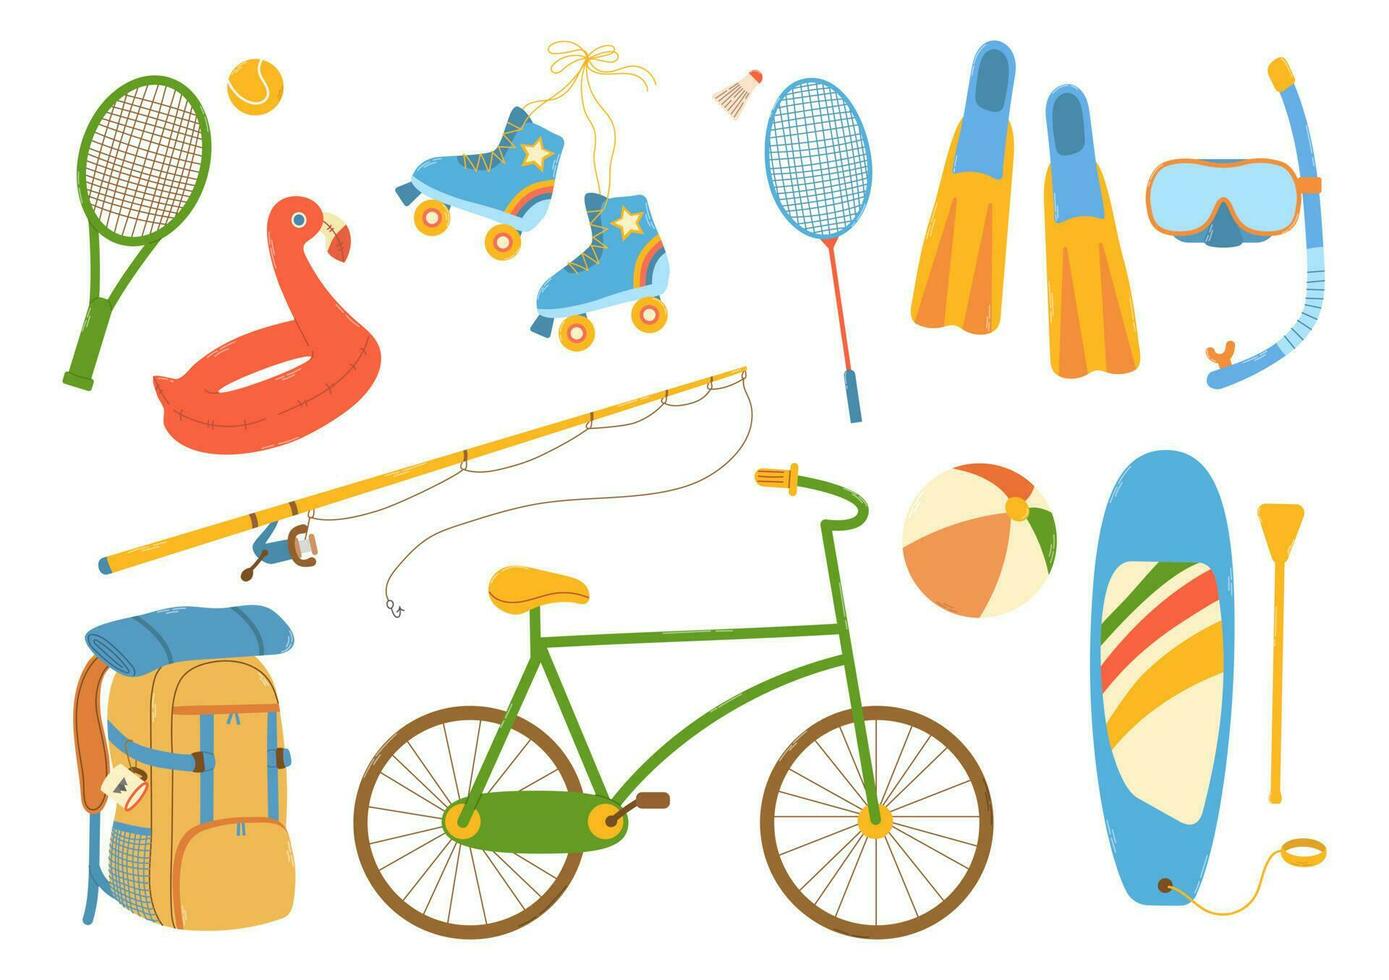 Big set items of beach and outdoor summer activities. Bicycle, roller skates, sup board, hiking backpack, diving mask and fins, badminton, tennis, fishing rod. Flat hand drawn vector illustration